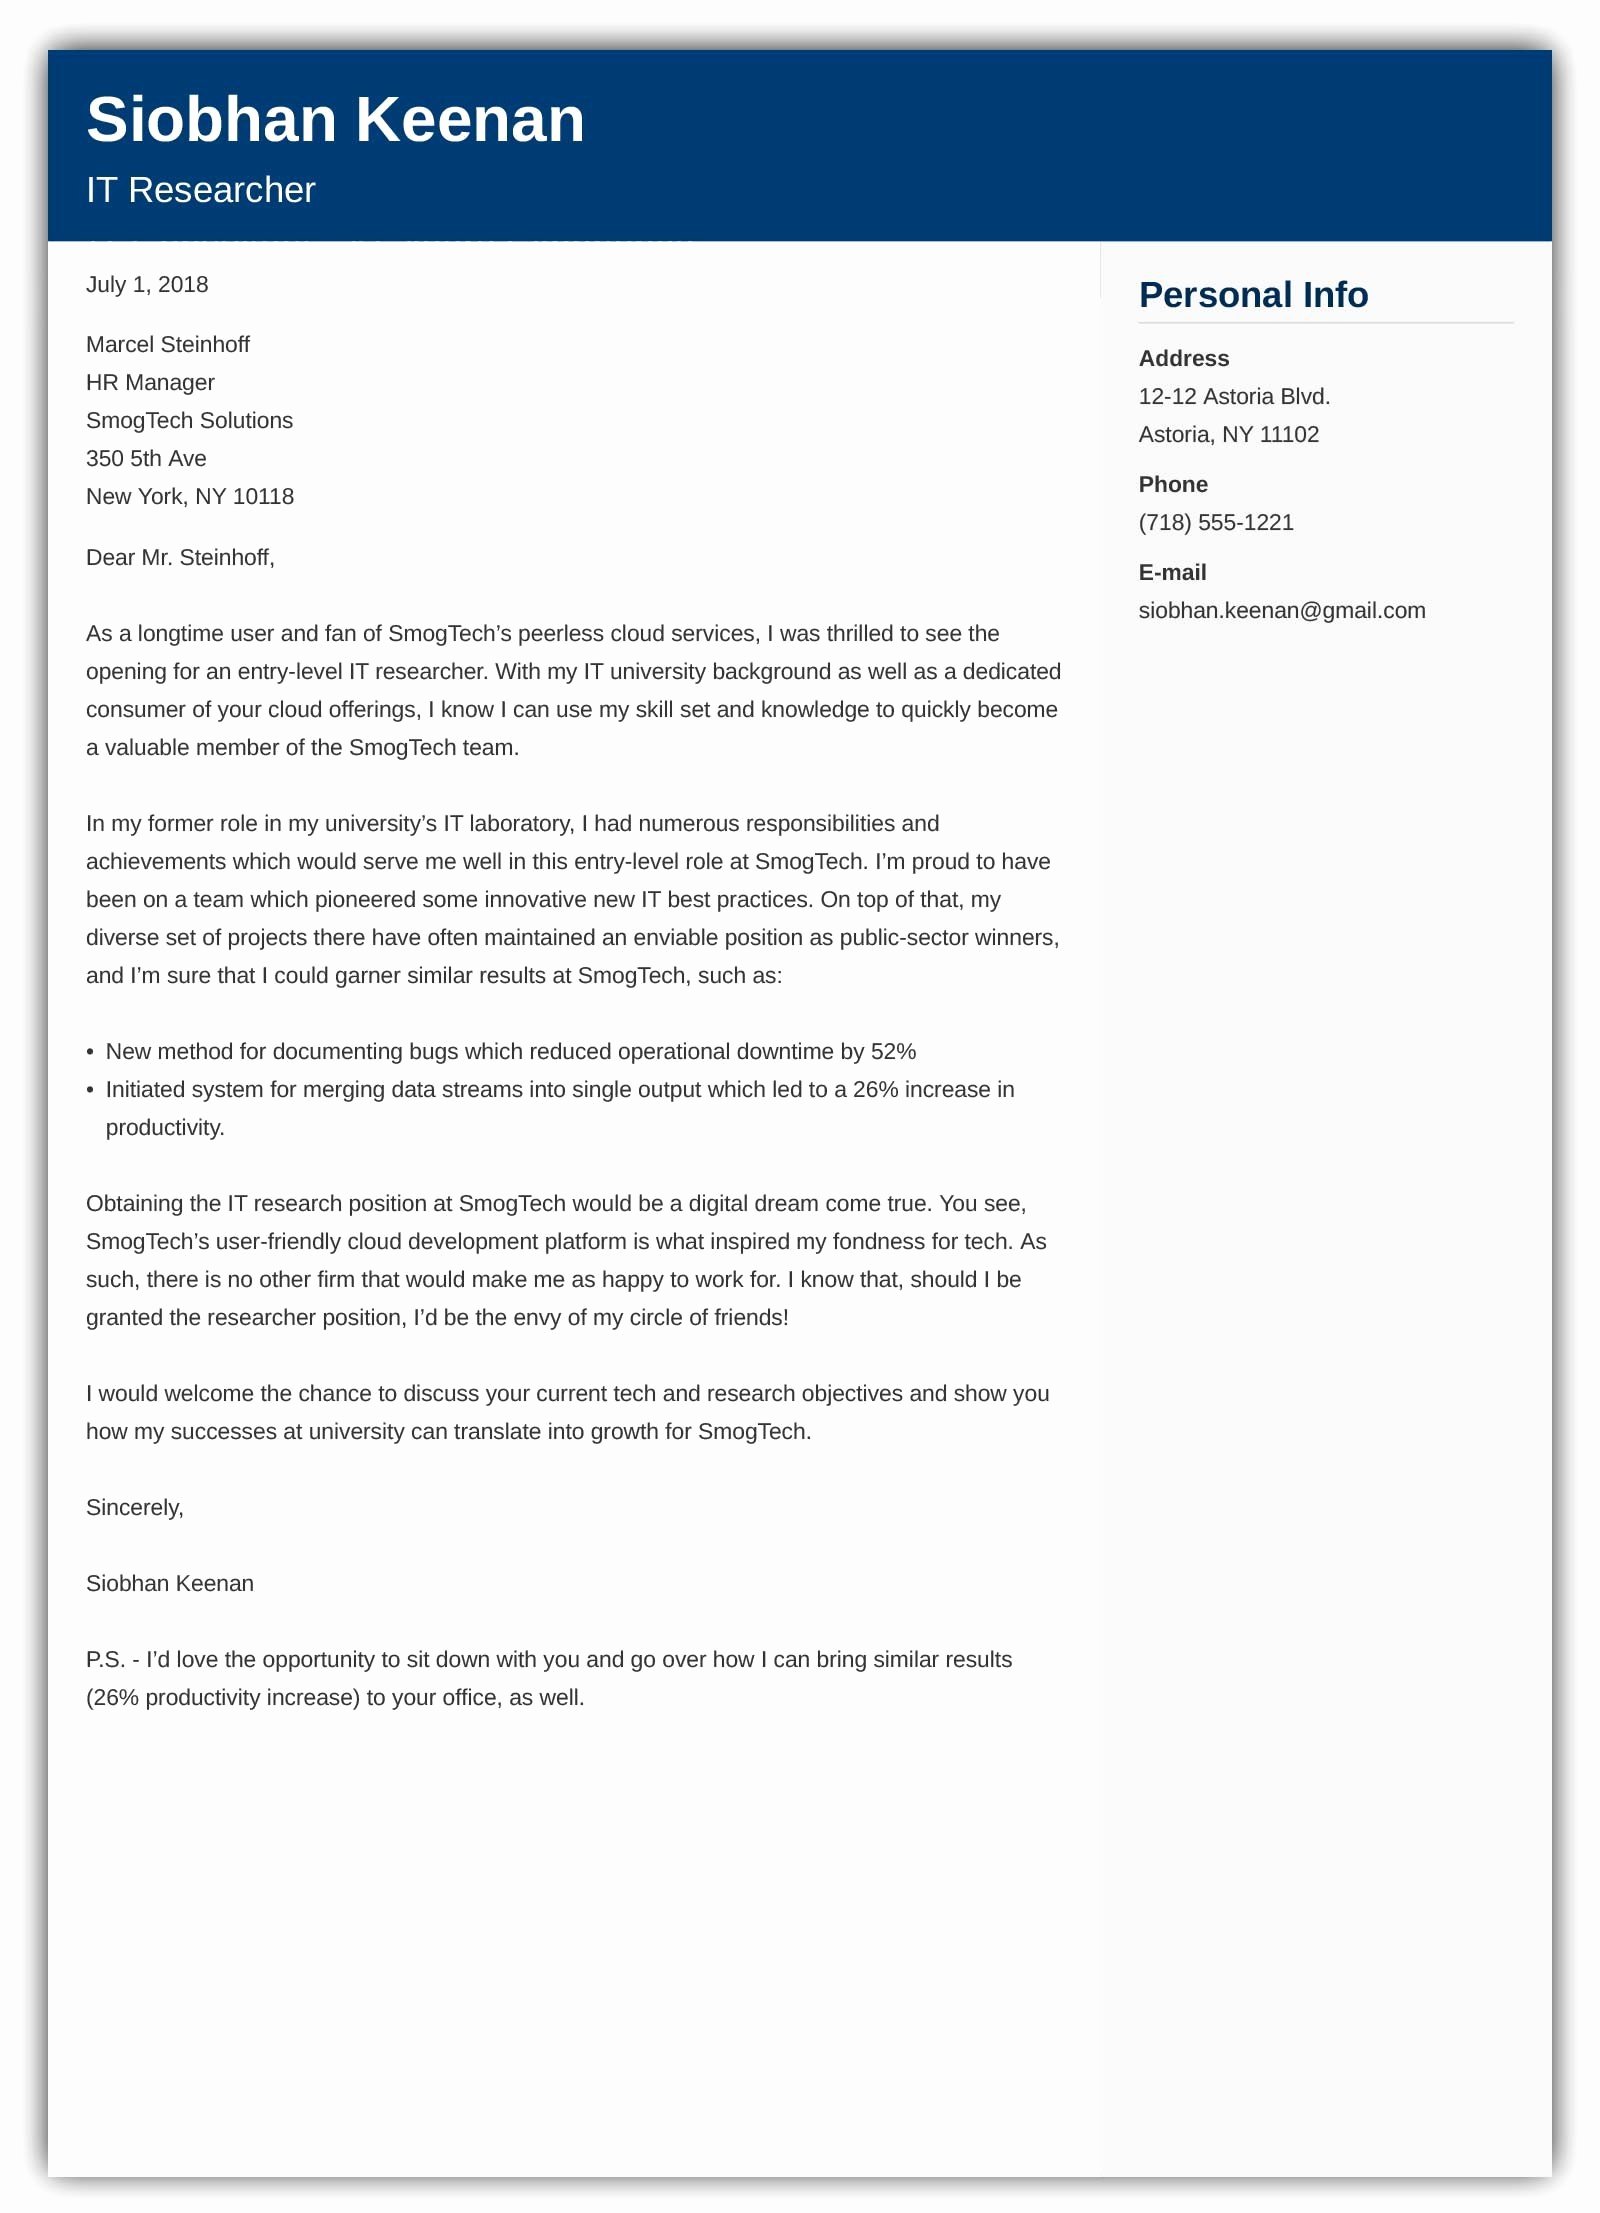 Entry Level Cover Letter Example New Entry Level Cover Letter with No Experience Example